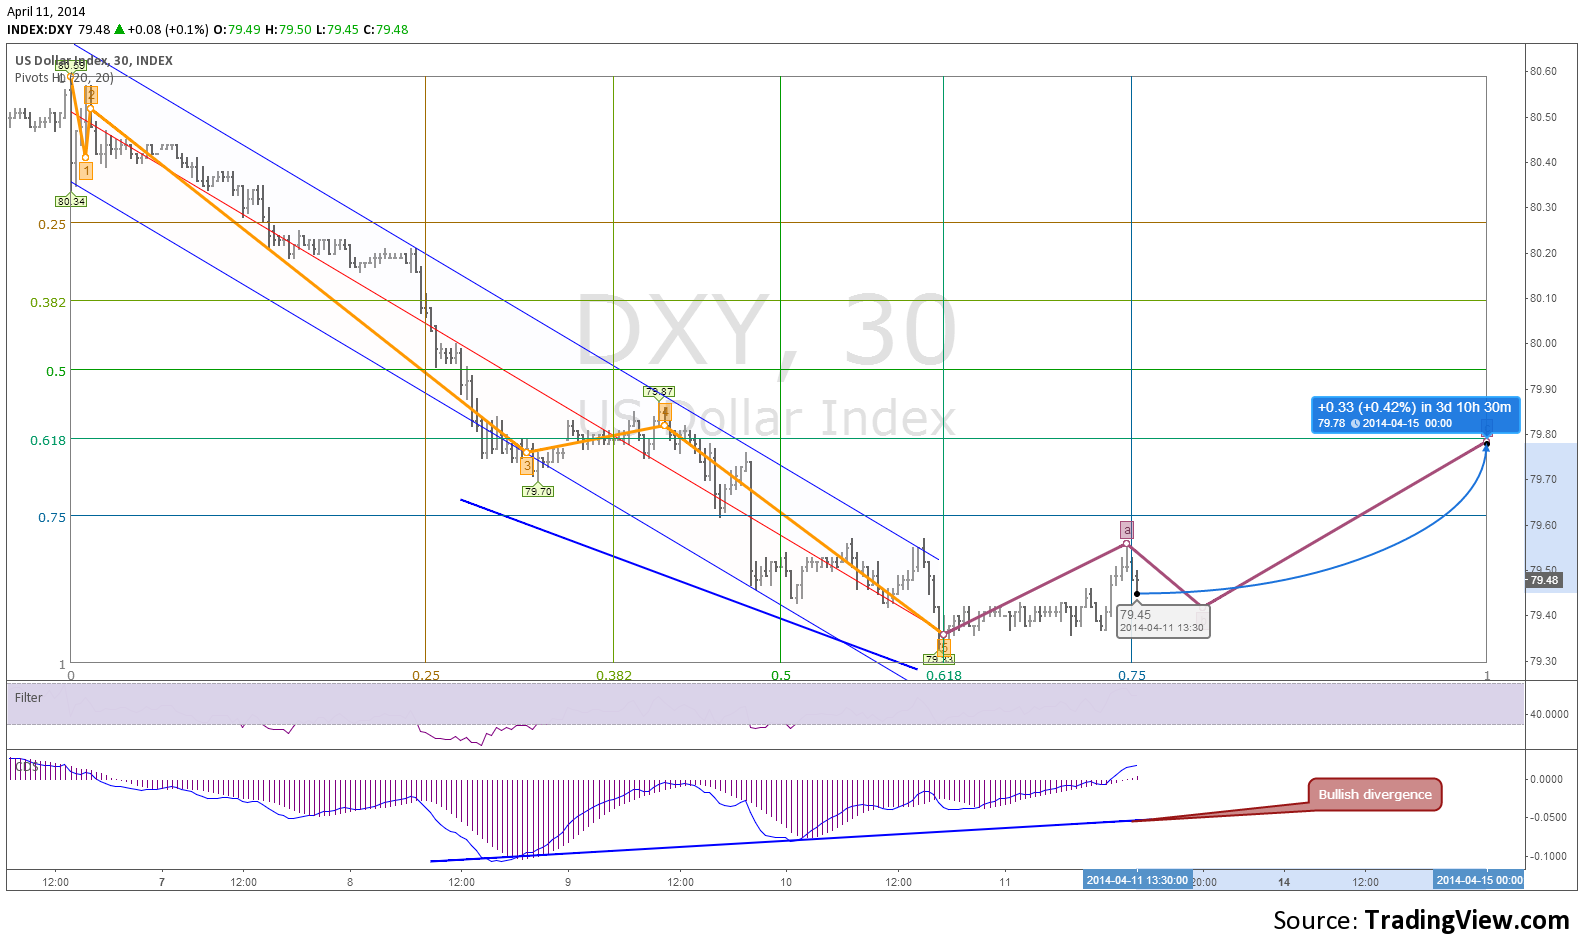 DXY Chart date range 2014 Data interval intraday